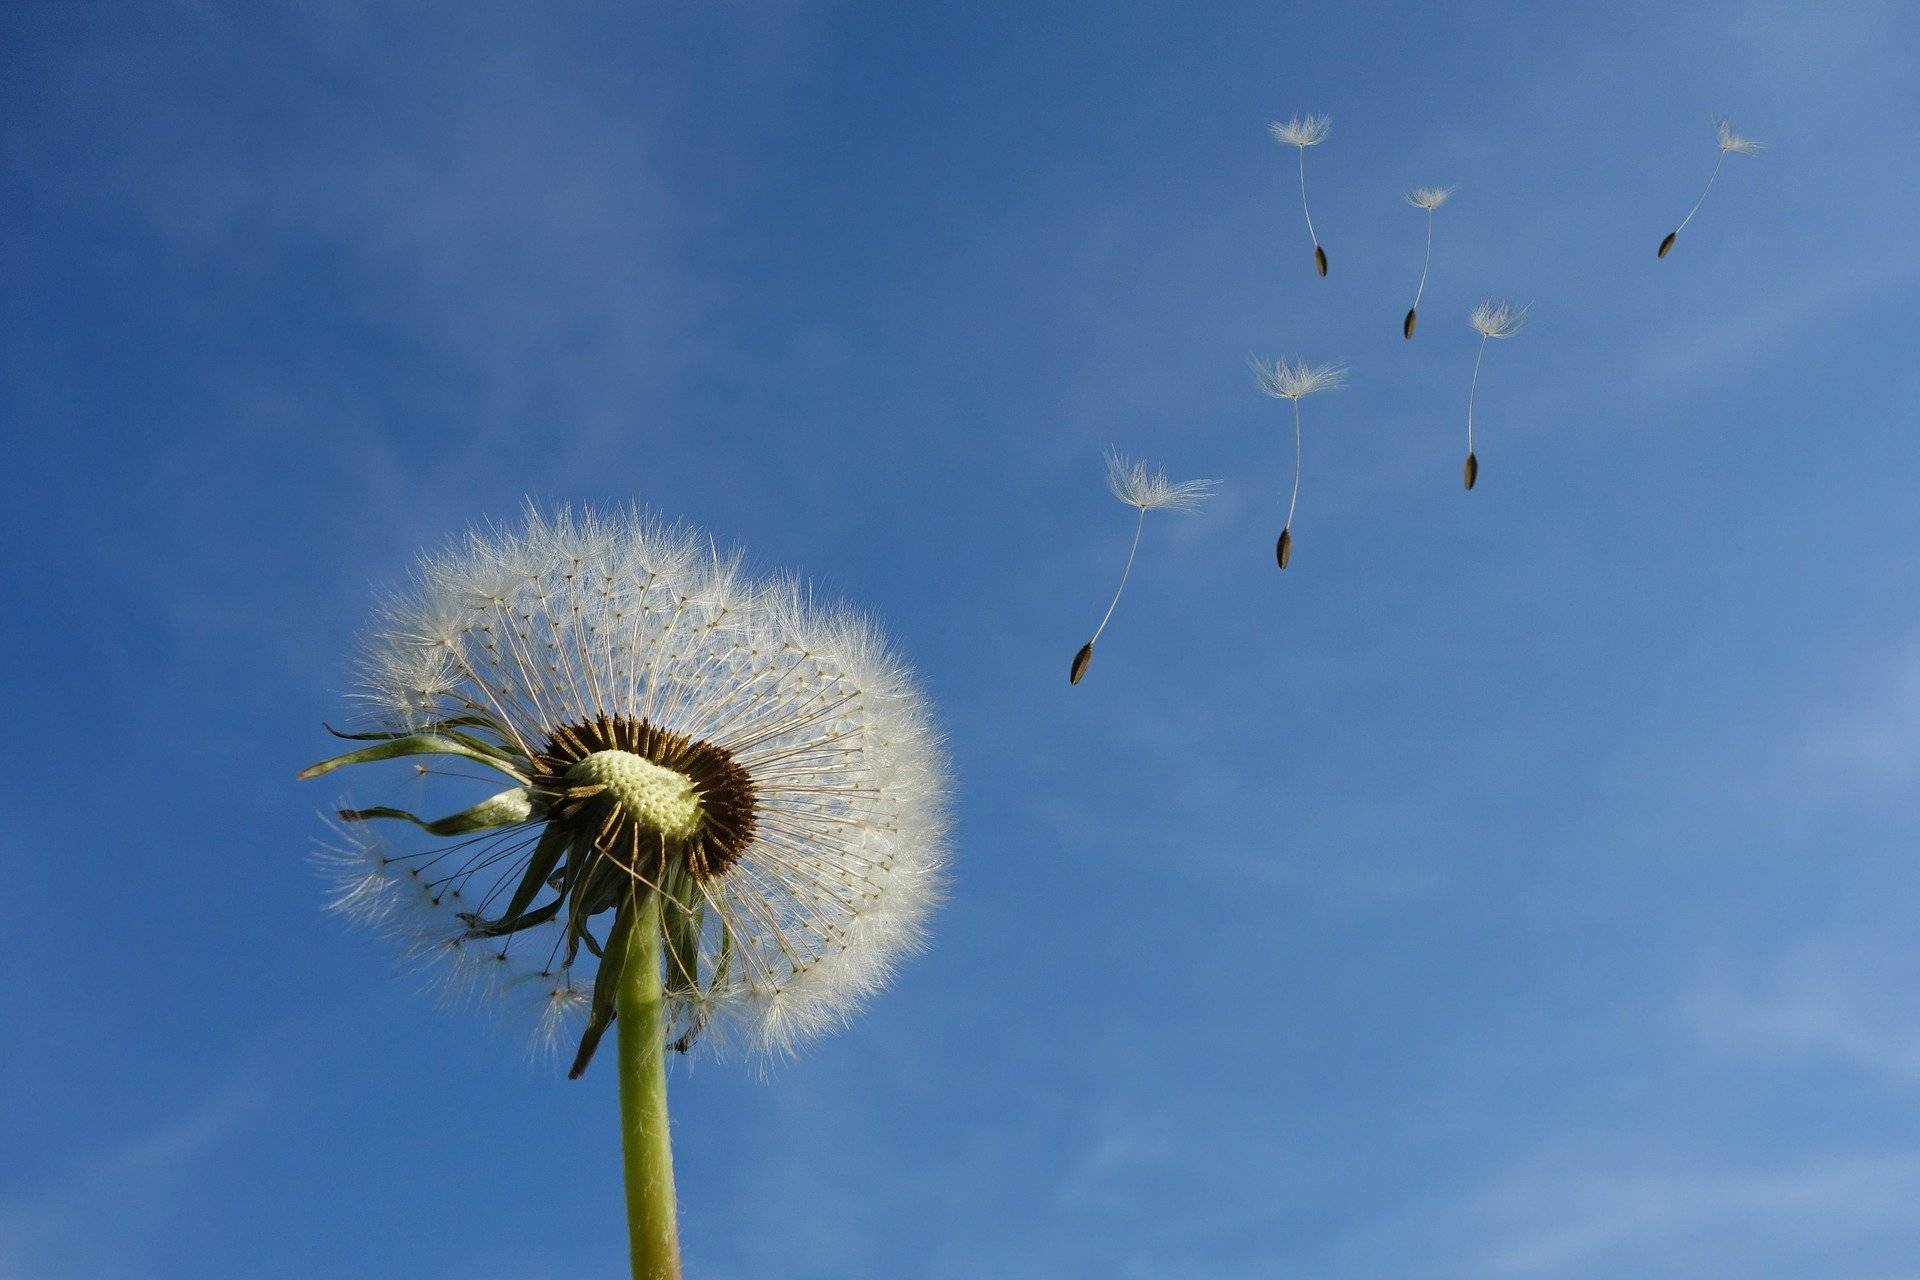 A dandelion with seeds floating in the air in the foreground. blue sky background.